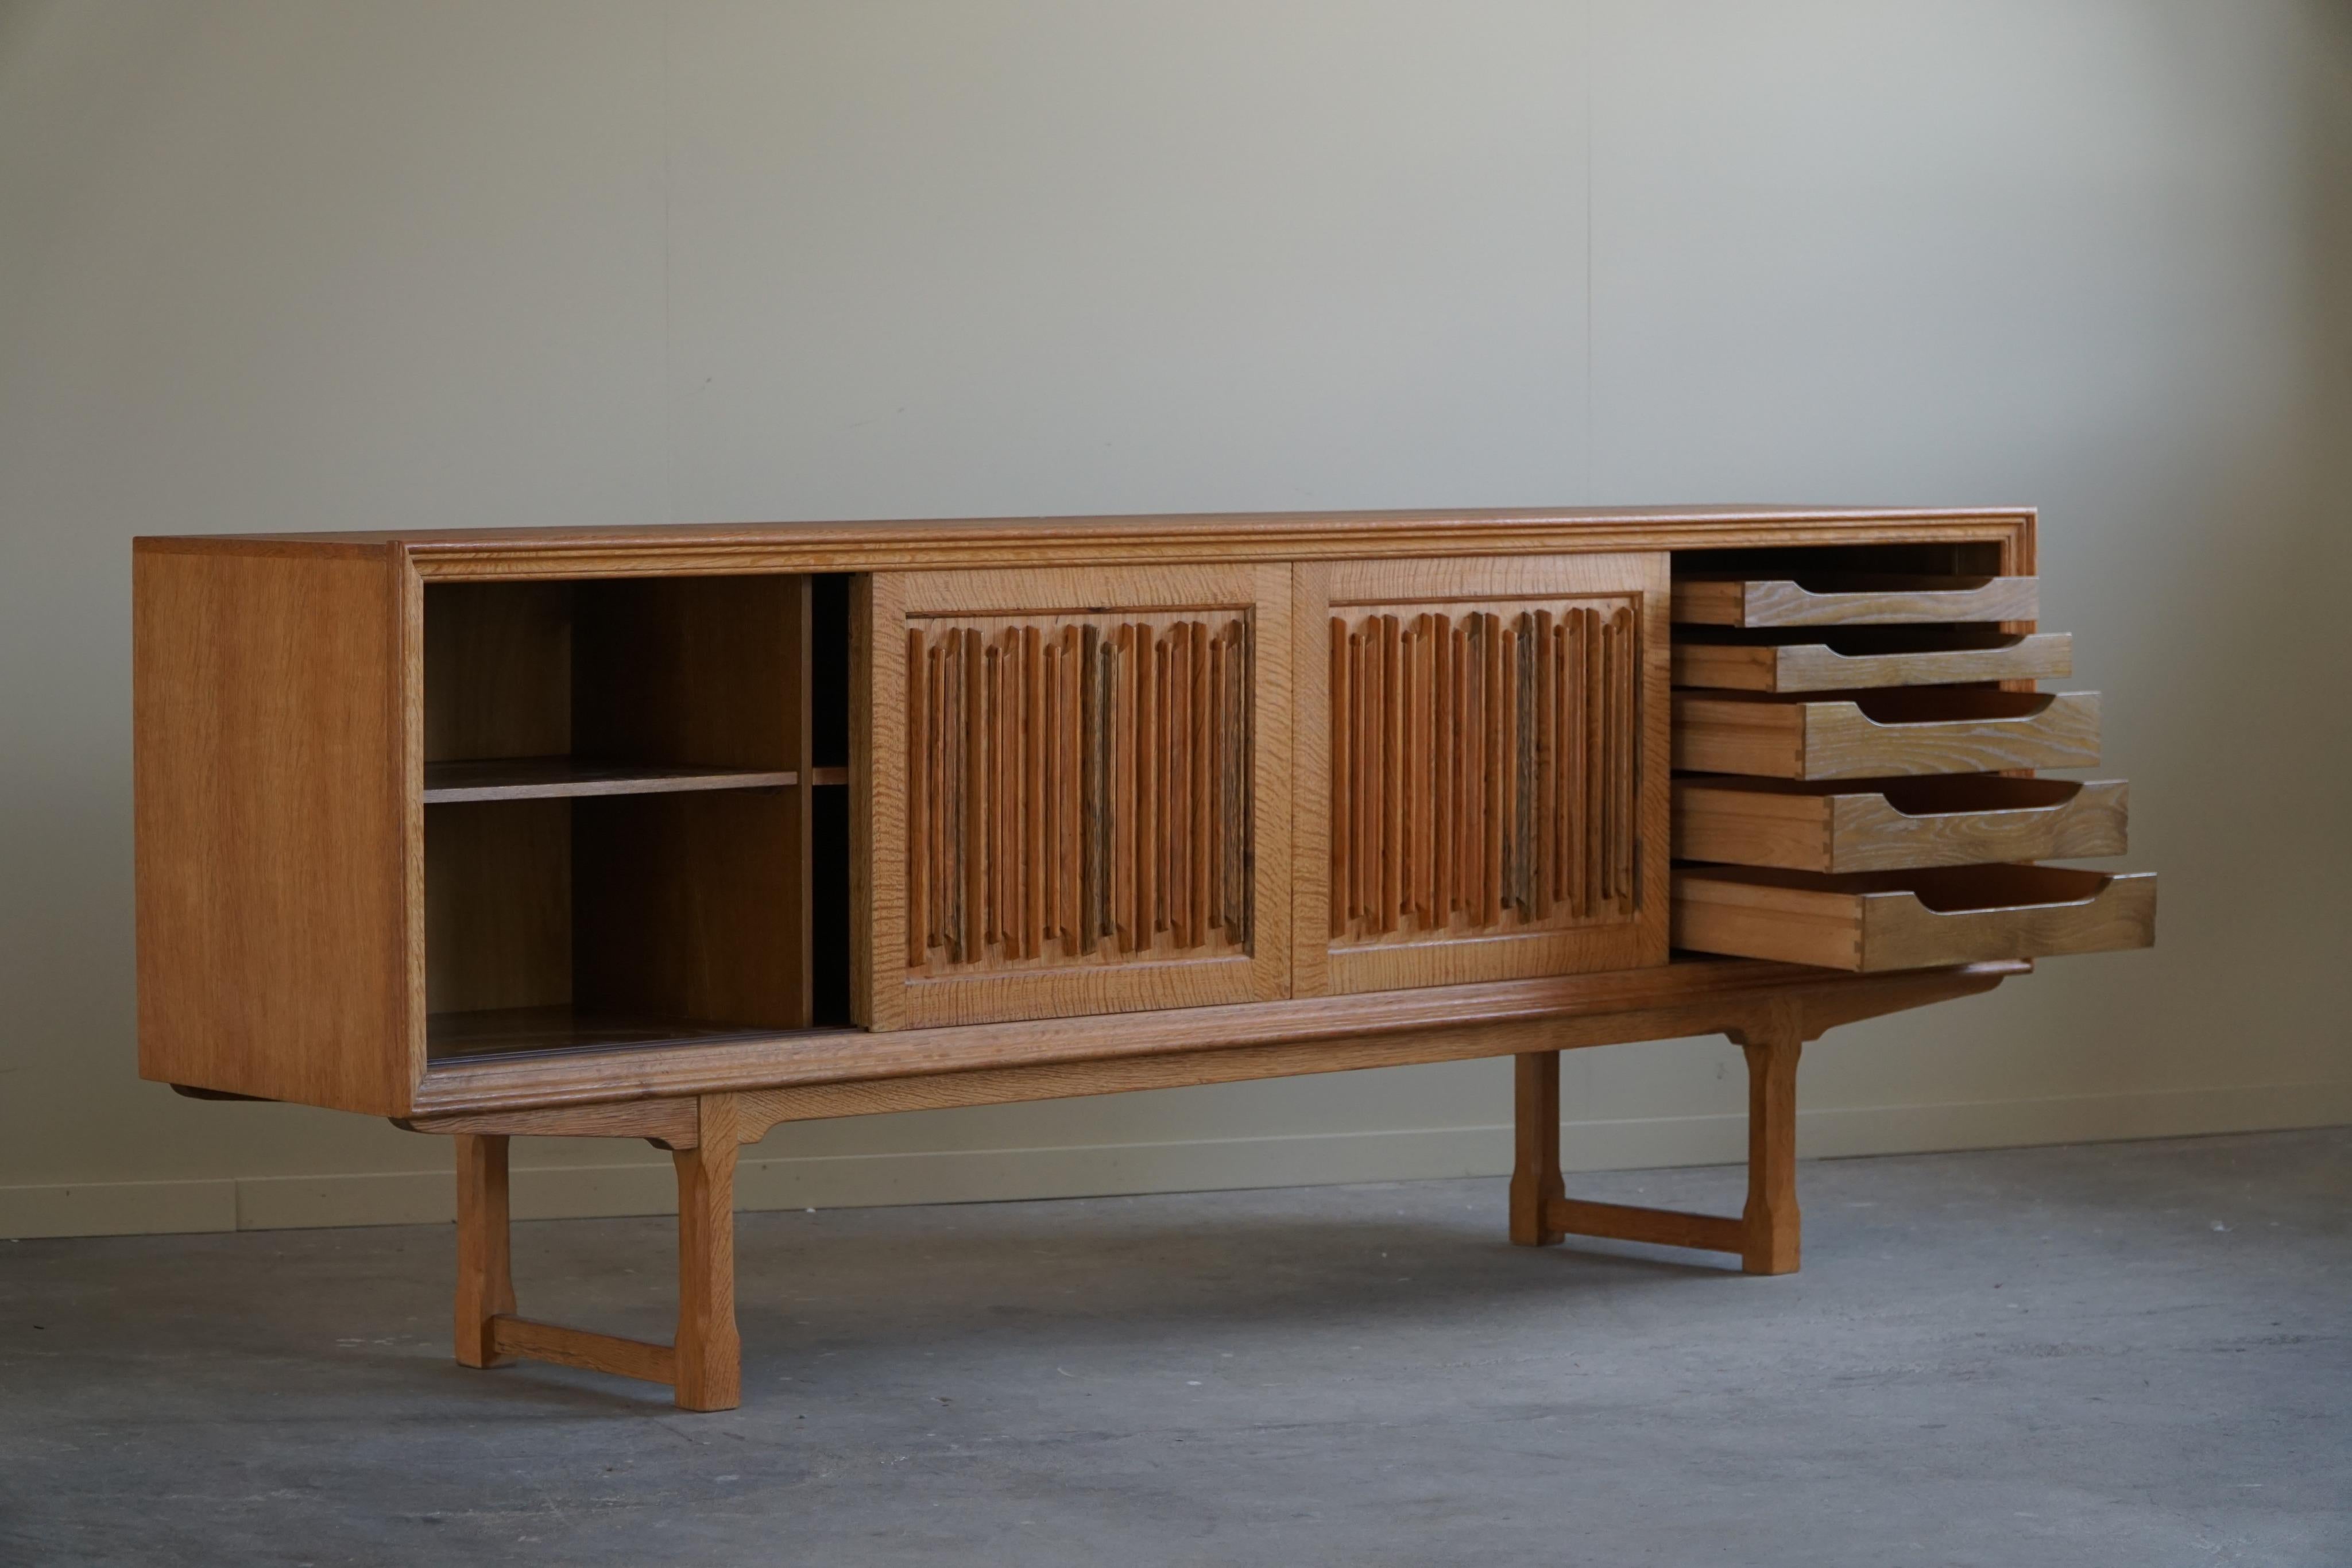 20th Century Midcentury Low Sculptural Sideboard in Oak, Made by a Danish Cabinetmaker, 1960